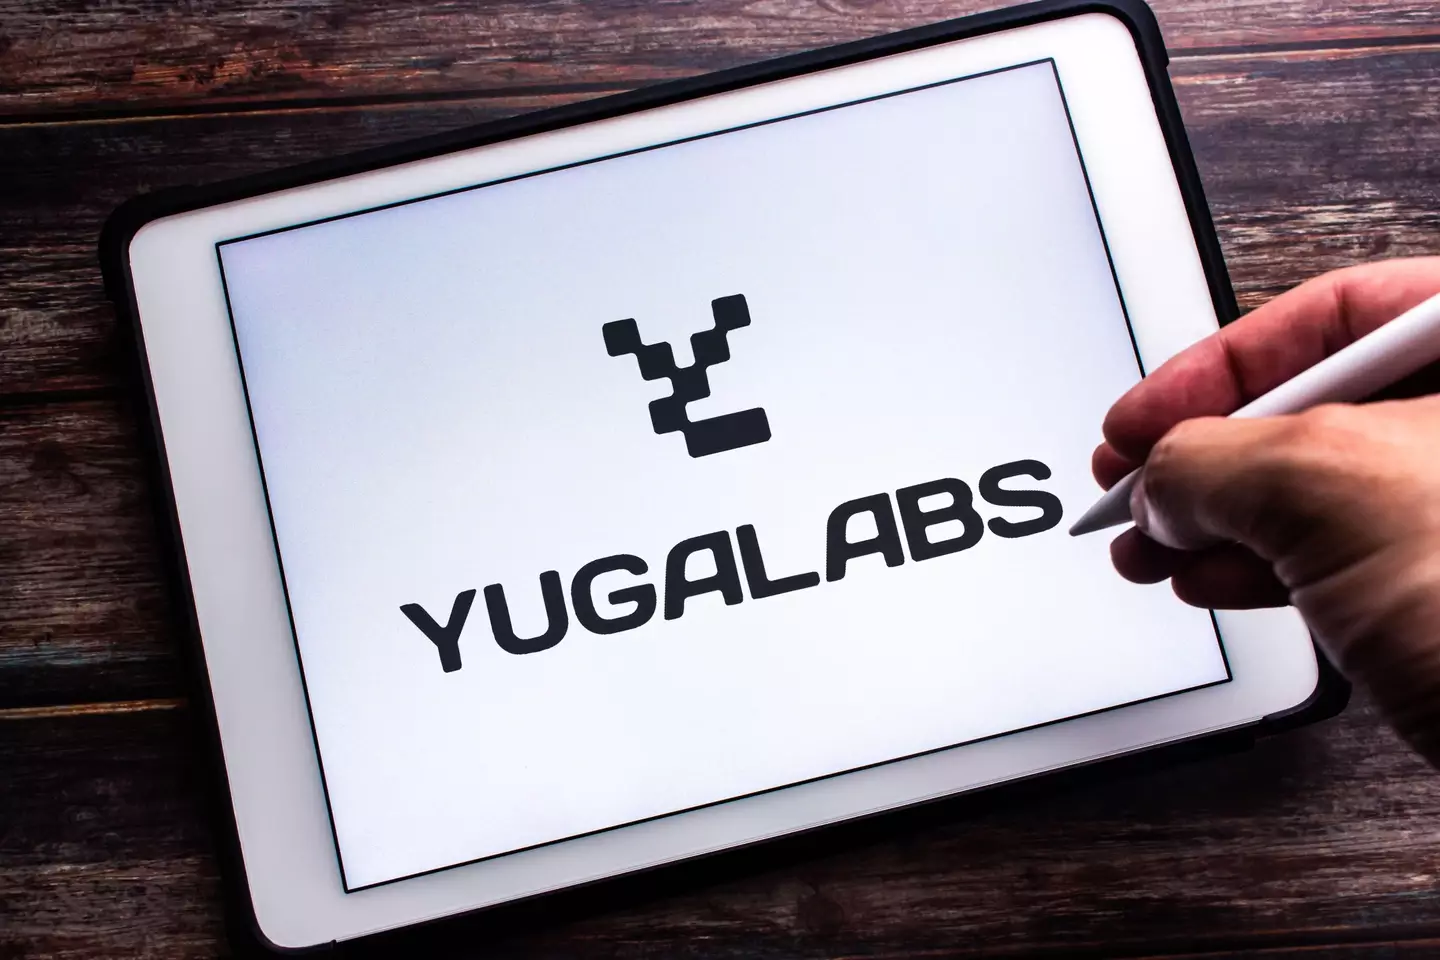 Yuga Labs has denied the allegations.